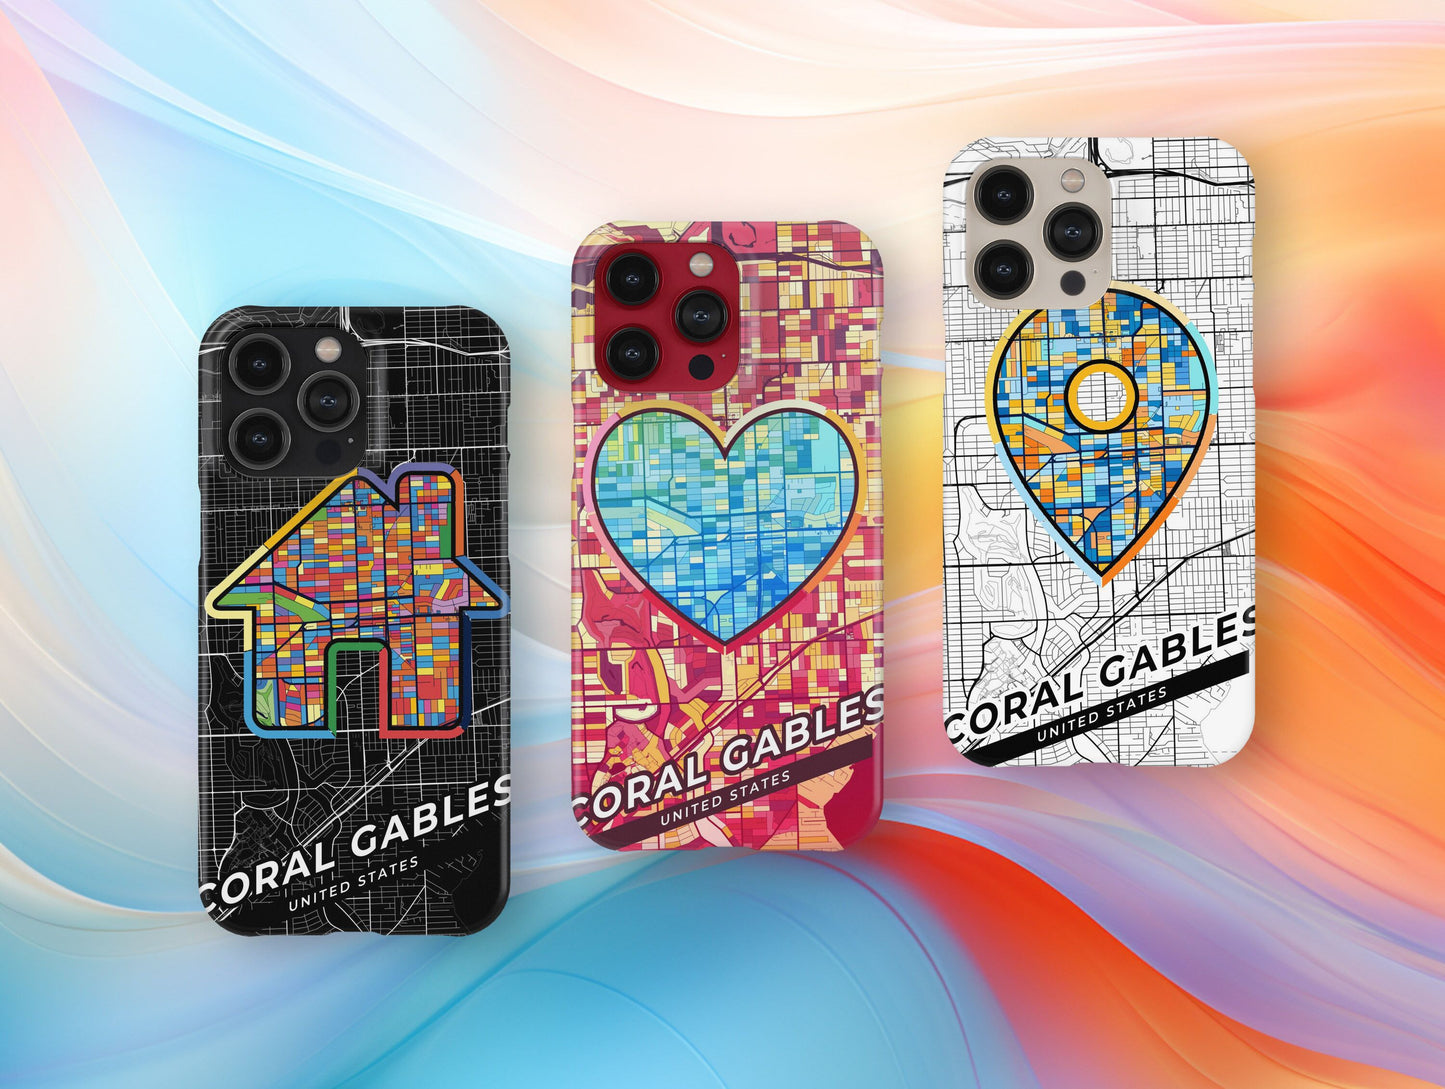 Coral Gables Florida slim phone case with colorful icon. Birthday, wedding or housewarming gift. Couple match cases.